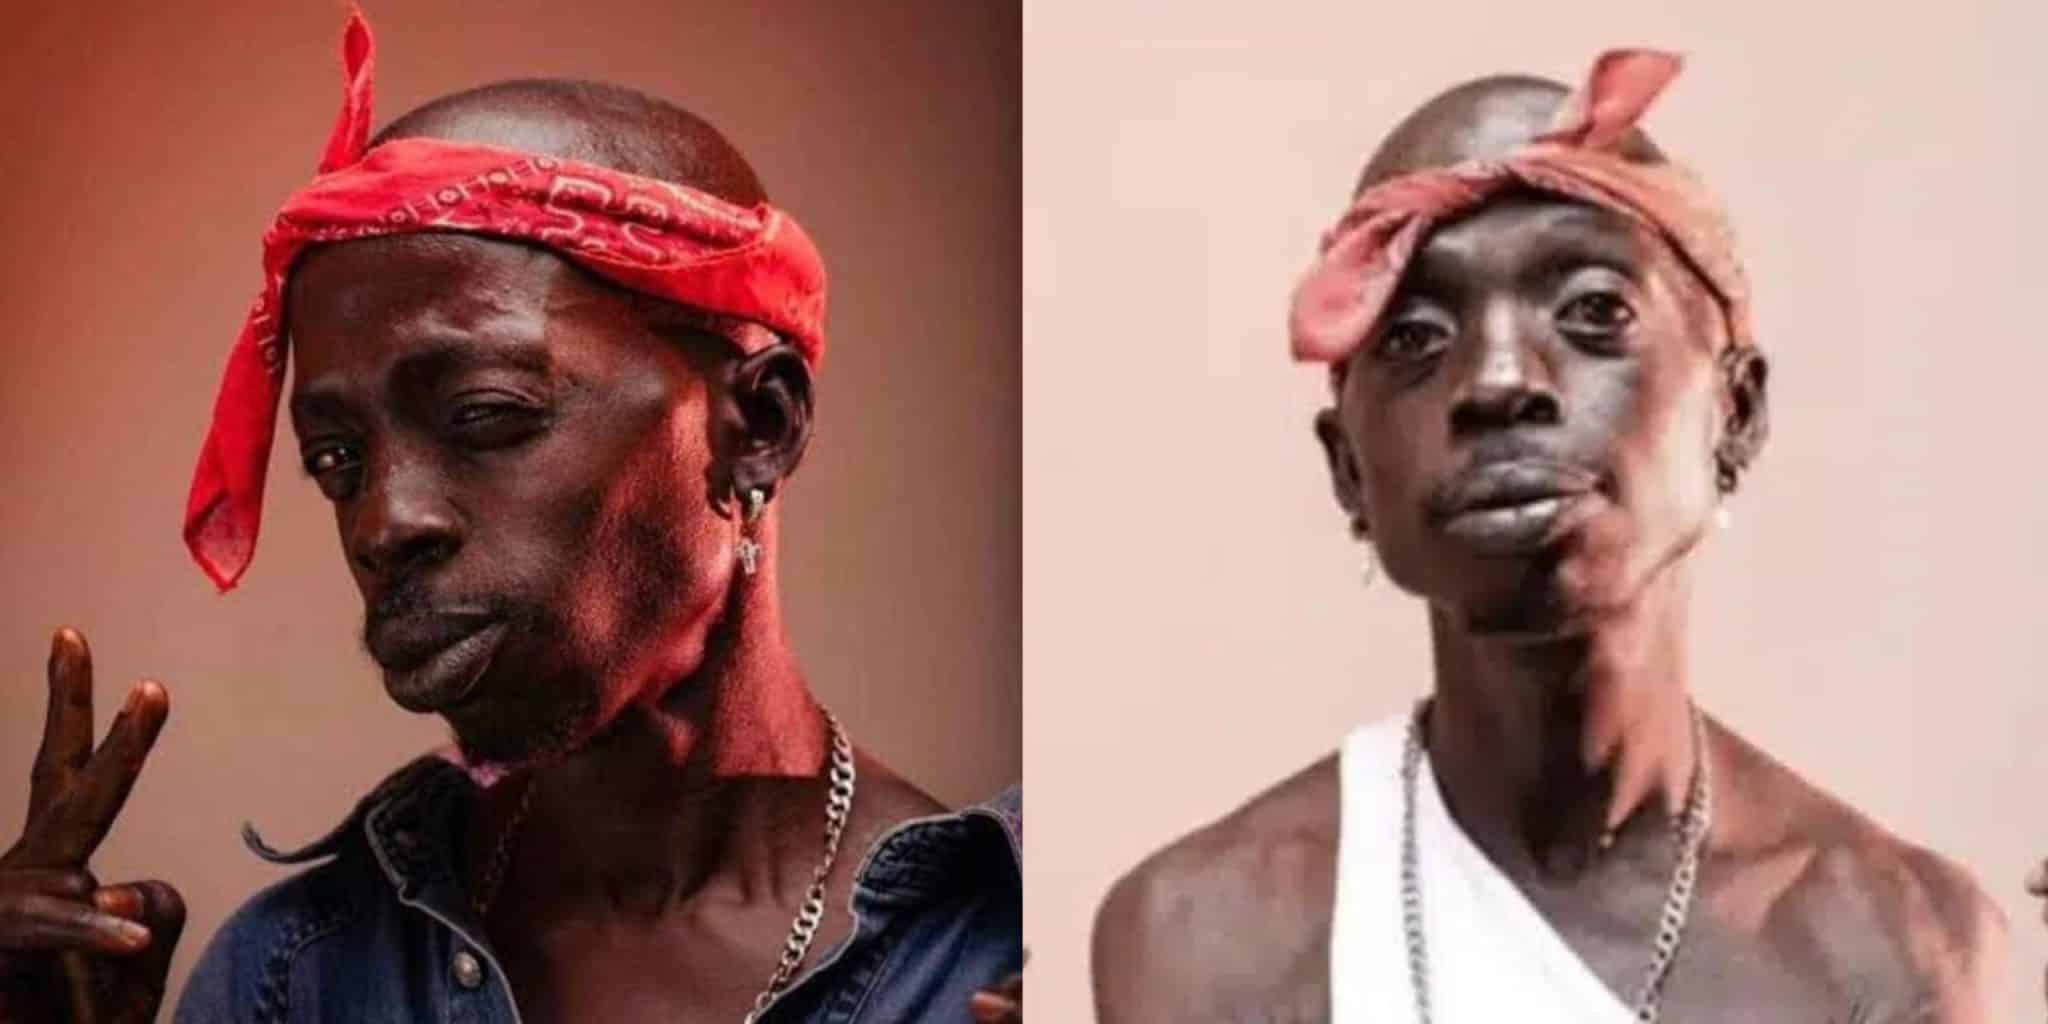 Ahoufe has been verified dead, and the death of a Ghanaian TikToker has gone viral due to a comparison to Tupac